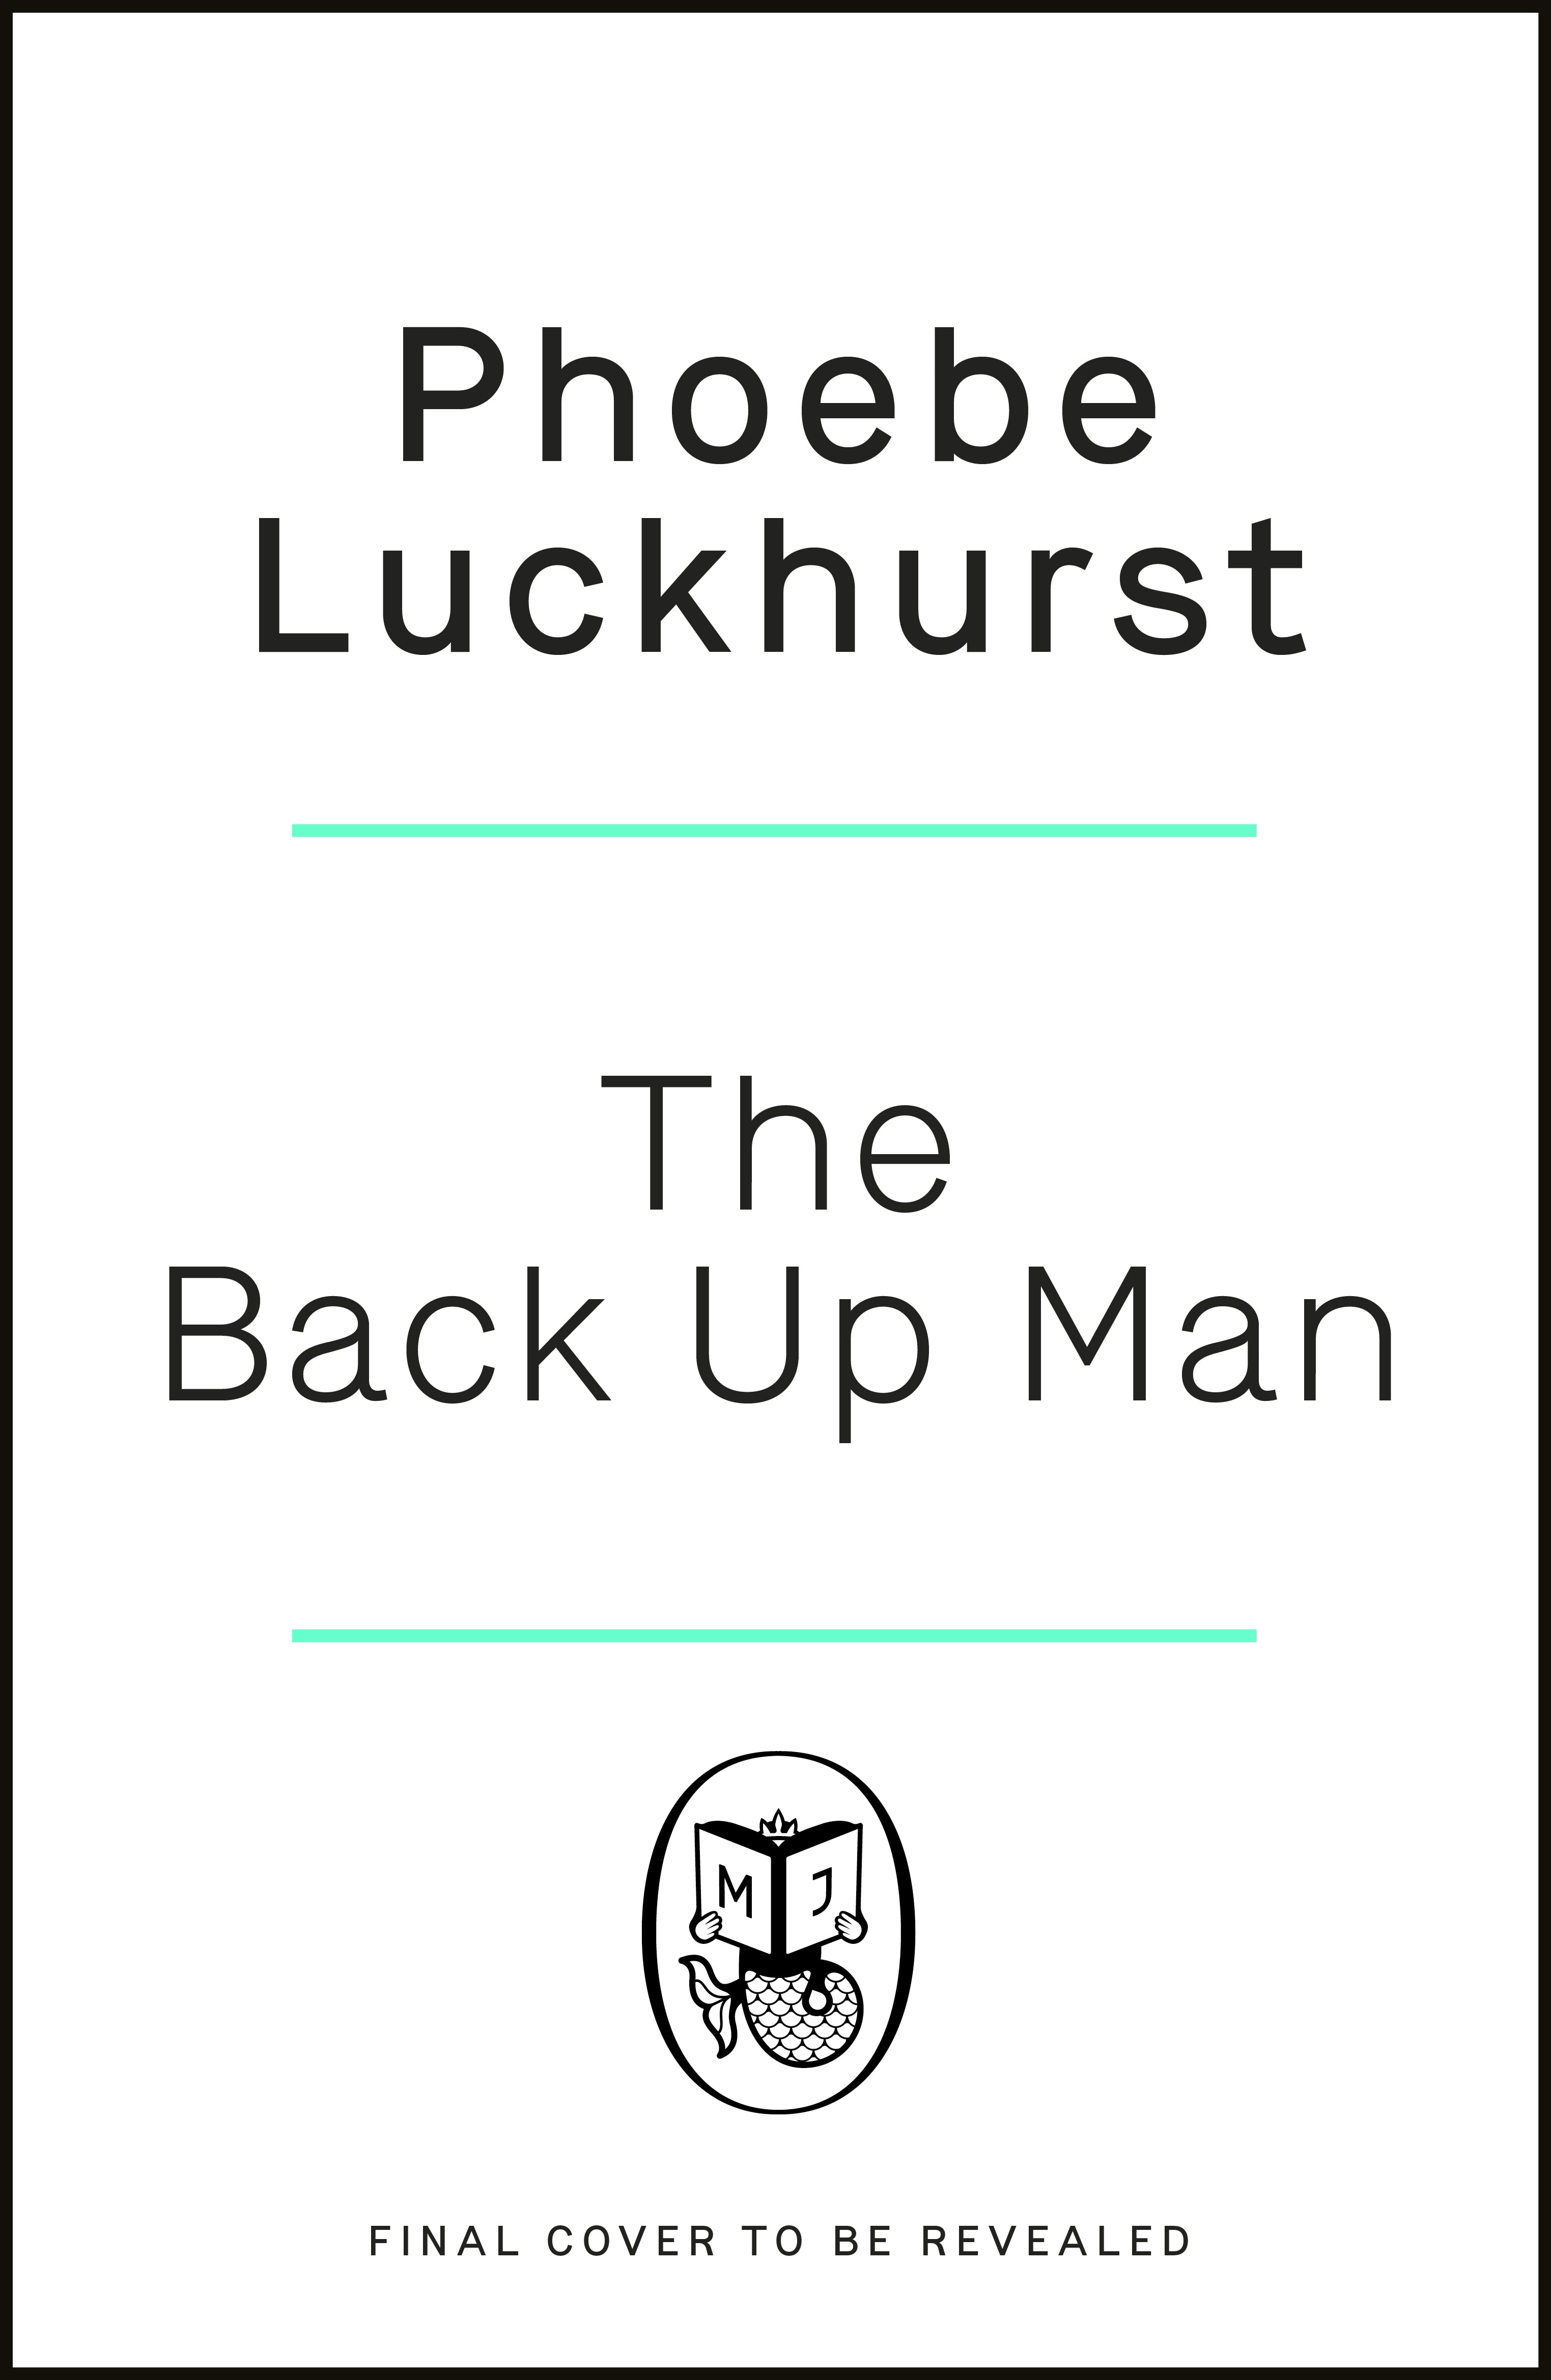 Book “The Back Up Man” by Phoebe Luckhurst — July 21, 2022